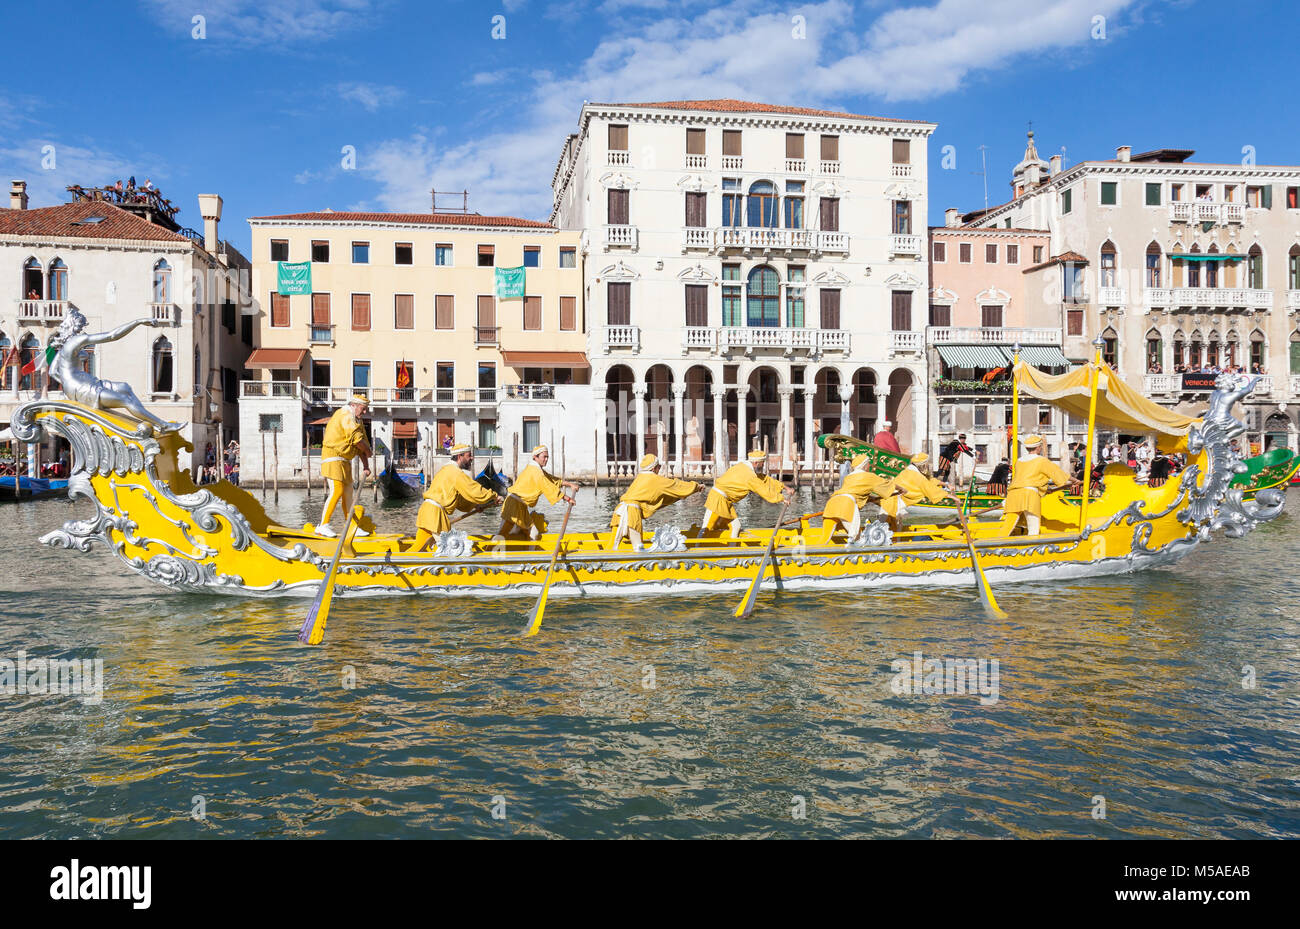 Historic boats in the Regata Storica, Grand Canal, Venice, Italy with rowers in a bright yellow boat with matching costumes carrying a dignatory Stock Photo